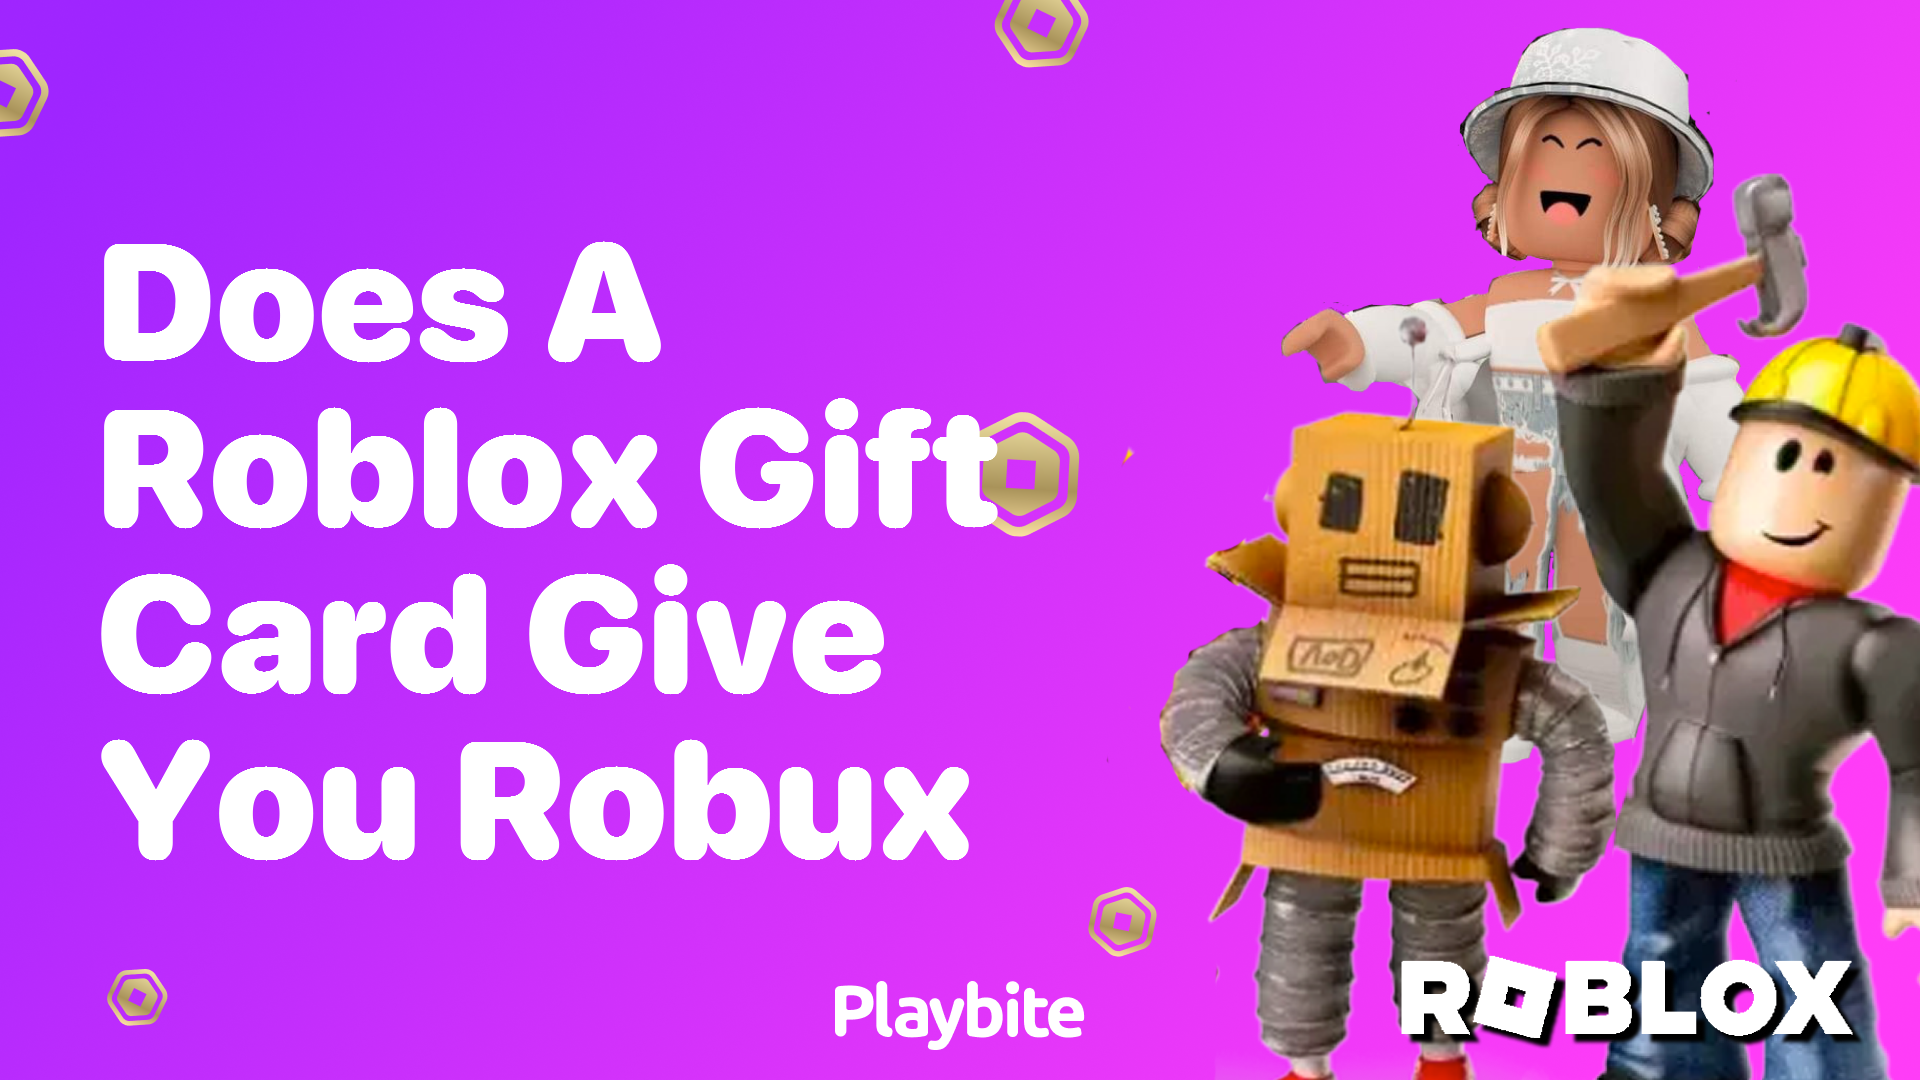 Does a Roblox Gift Card Give You Robux?